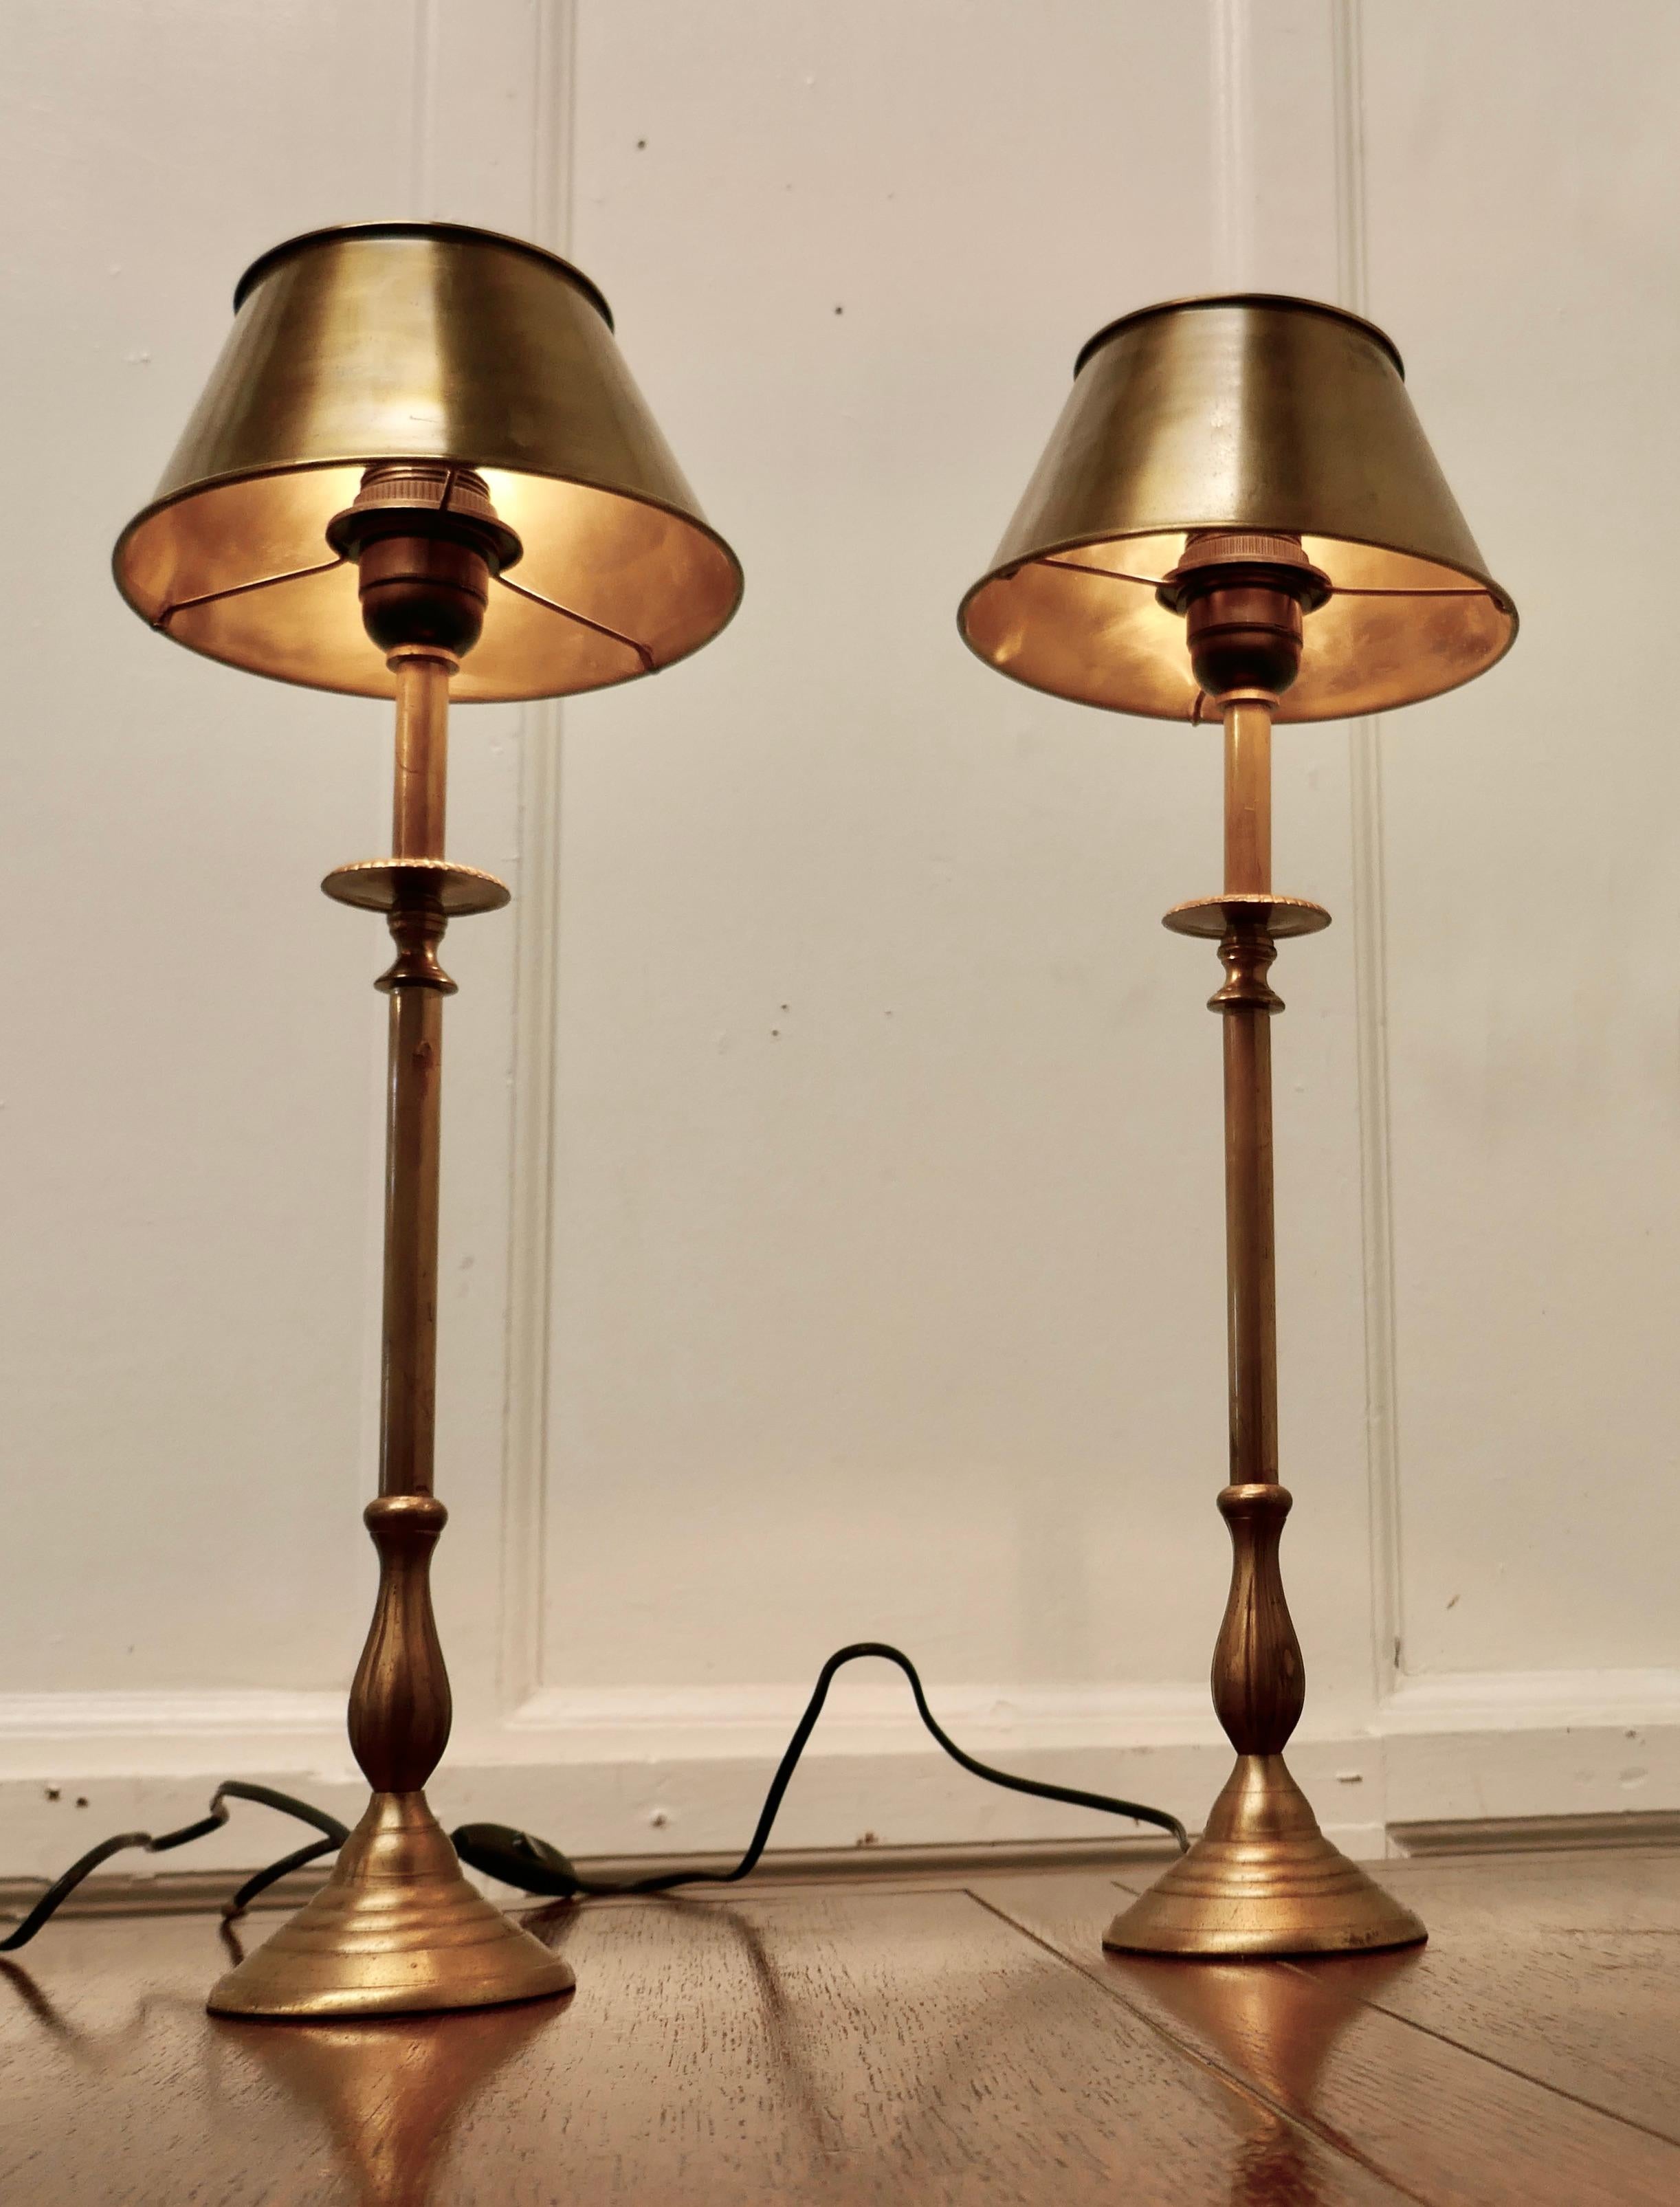 A Pair of Tall French Brass Column Table Lamps with Brass Shades

These are a very attractive pair of bedside lamps they each have a single column and a brass lampshade
The lamps are in good condition, working and with a good natural patina. The